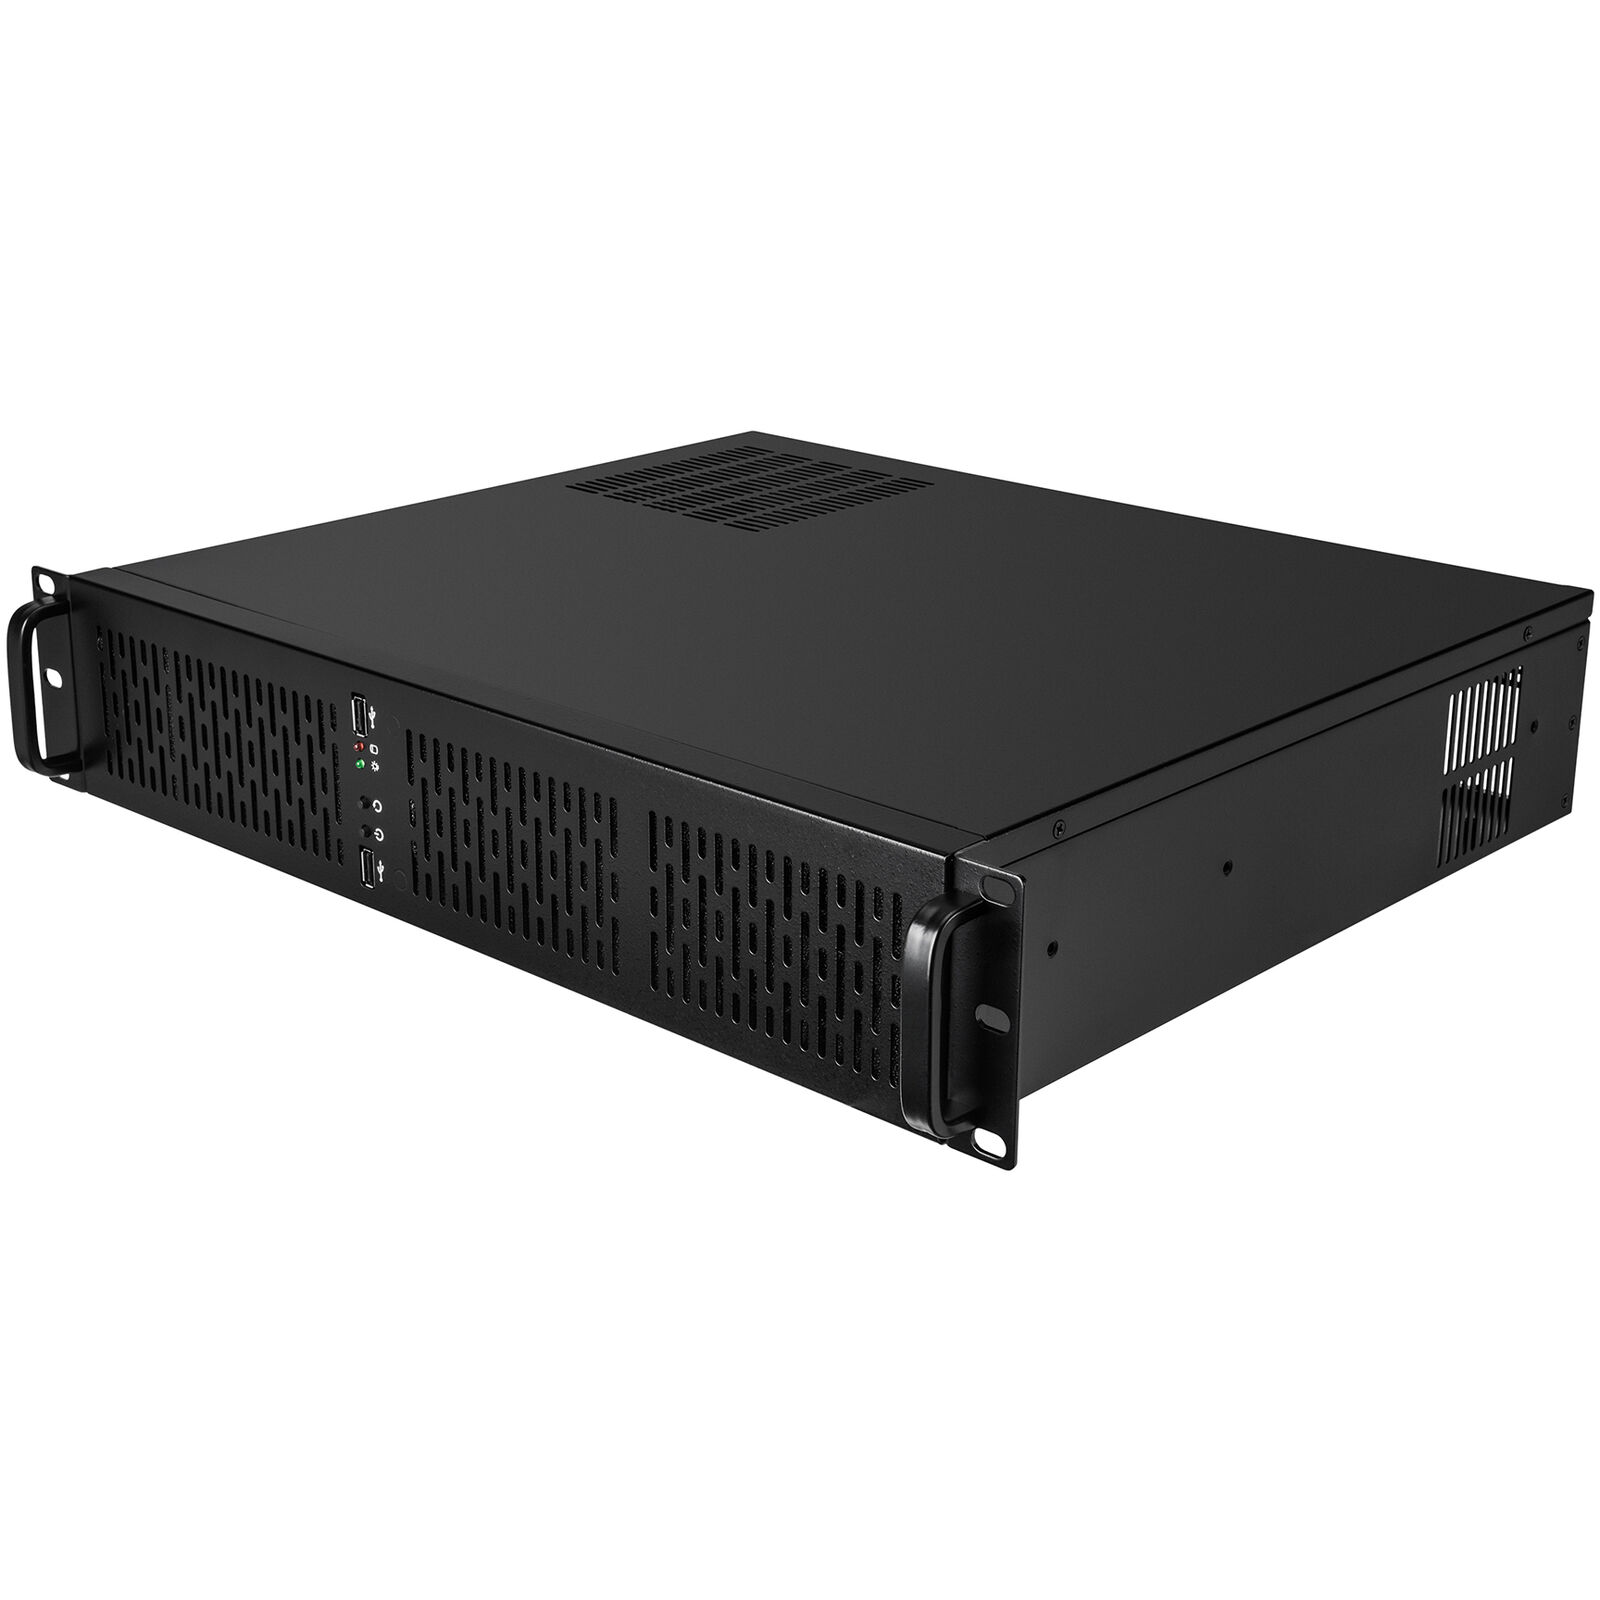 Rosewill RSV-Z2600 Metal/Steel 2U Rackmount Server Chassis with 3 Fans